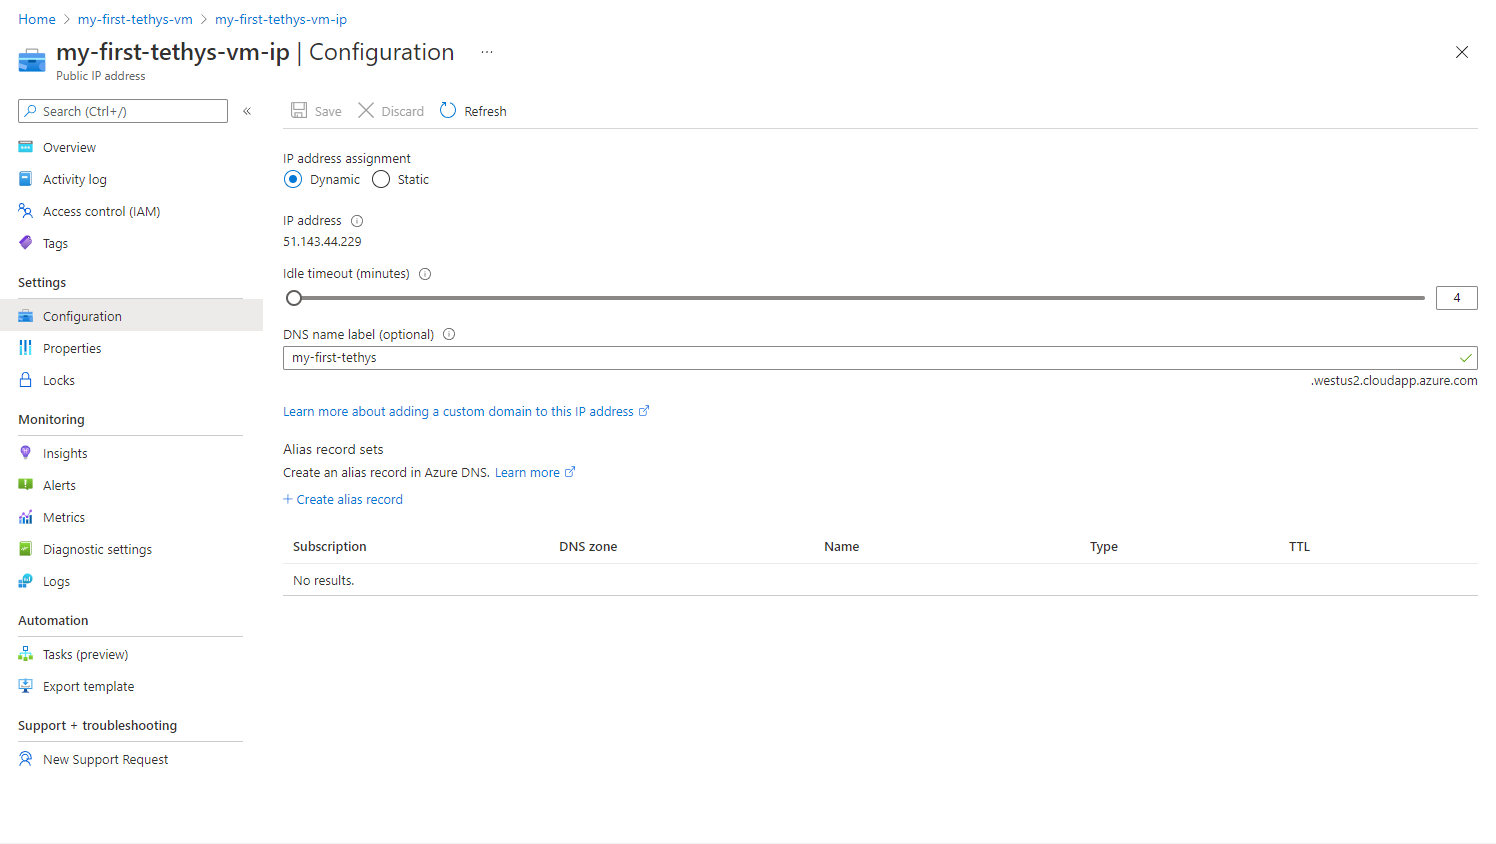 Screenshot of the domain name configuration page for an Azure VM